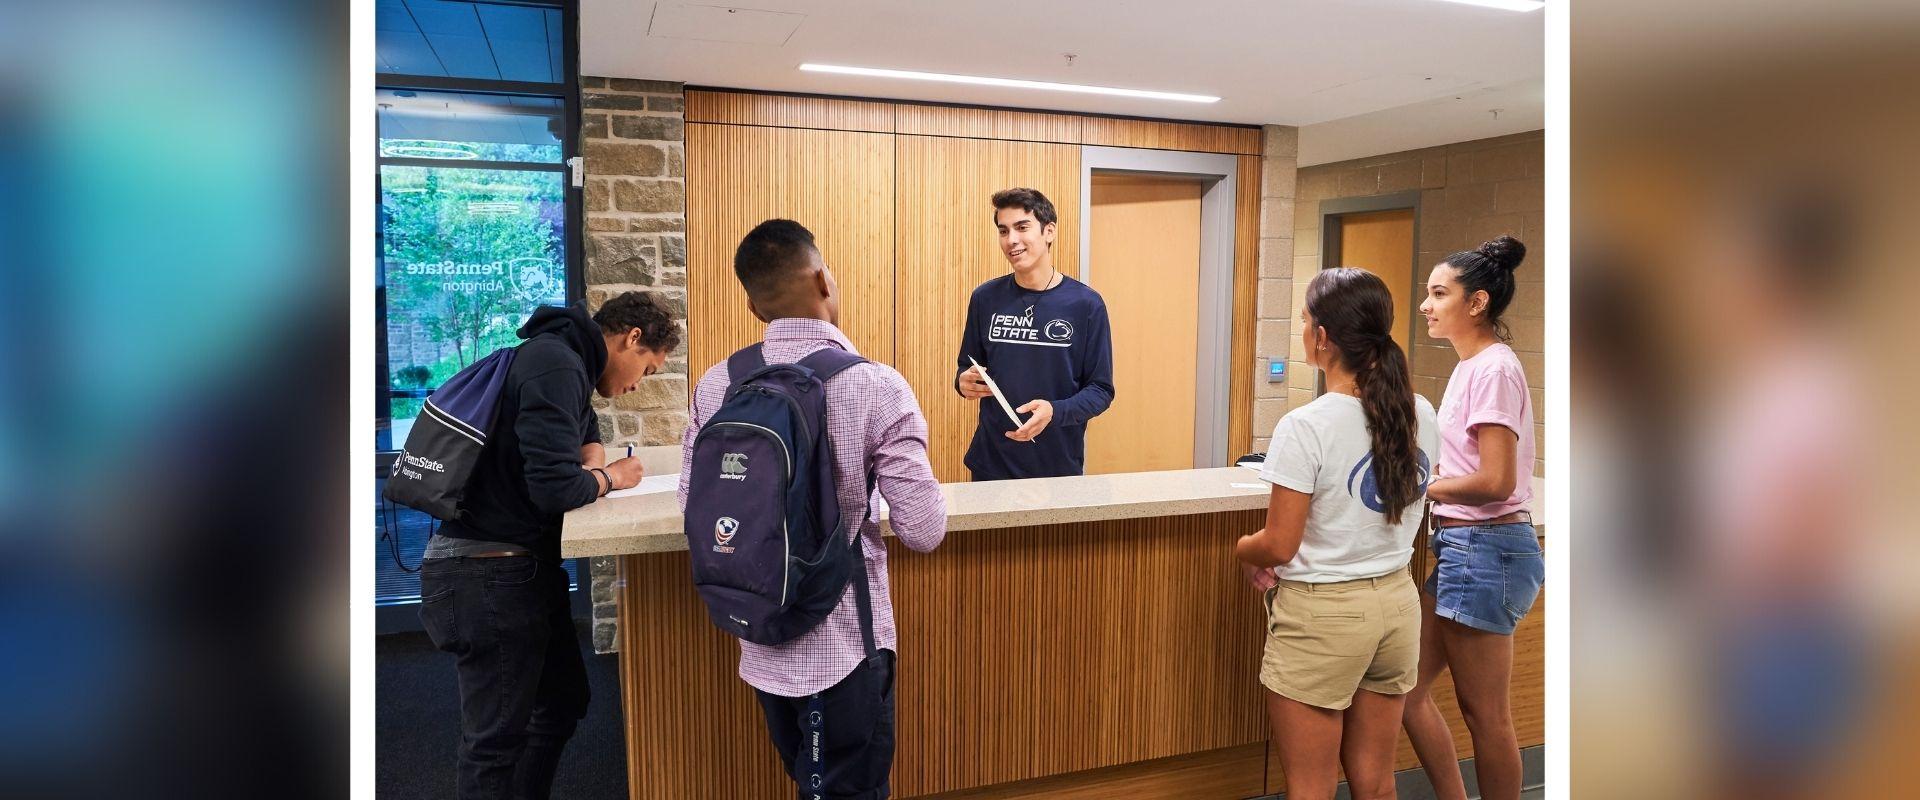 students at front desk